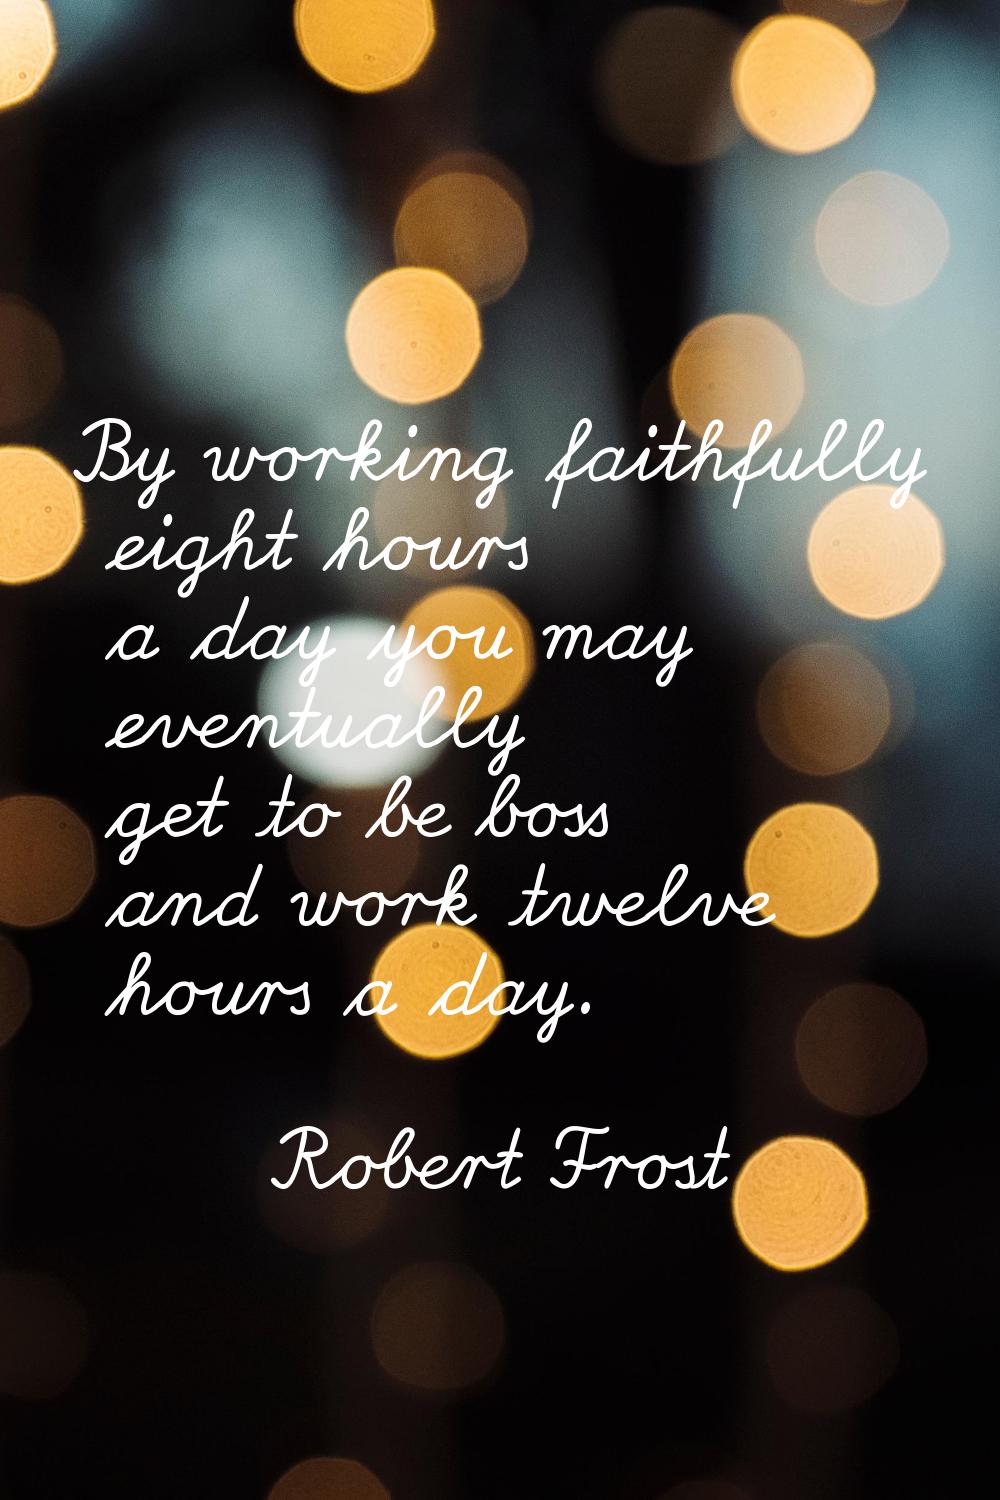 By working faithfully eight hours a day you may eventually get to be boss and work twelve hours a d